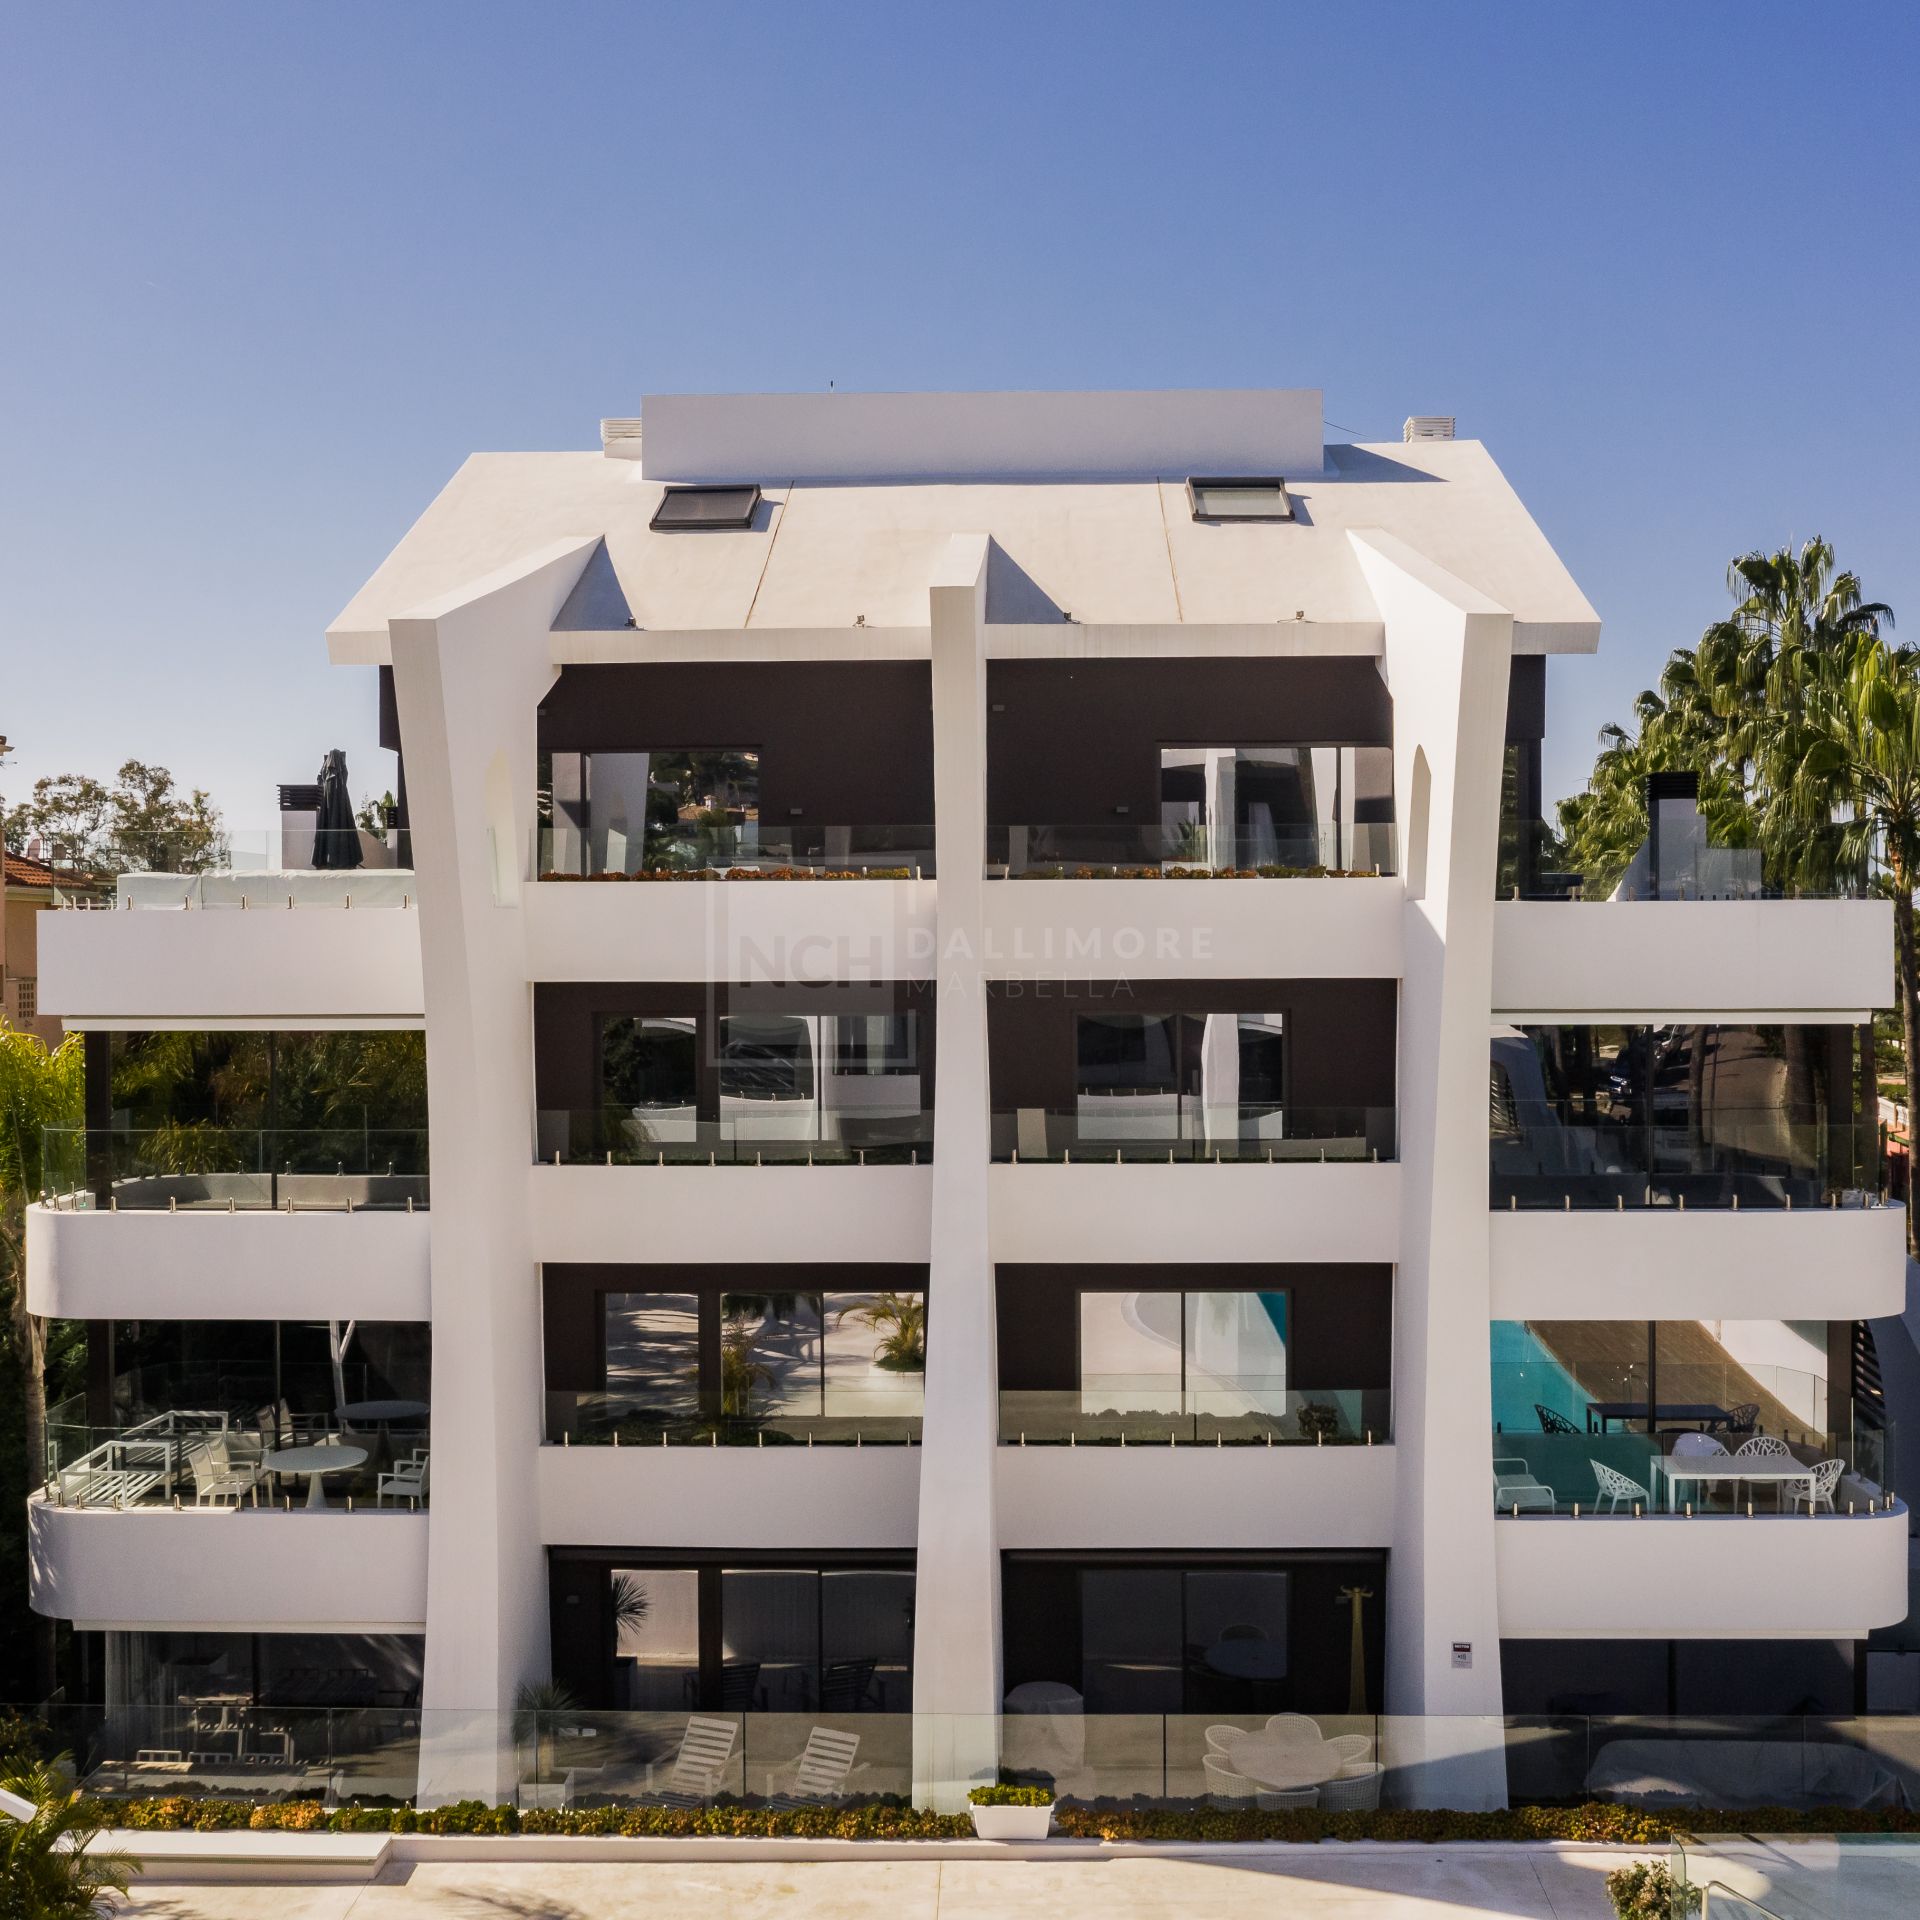 STRIKING 3-BEDROOM CONTEMPORARY LUXURY APARTMENT CLOSE TO BEACH EAST MARBELLA